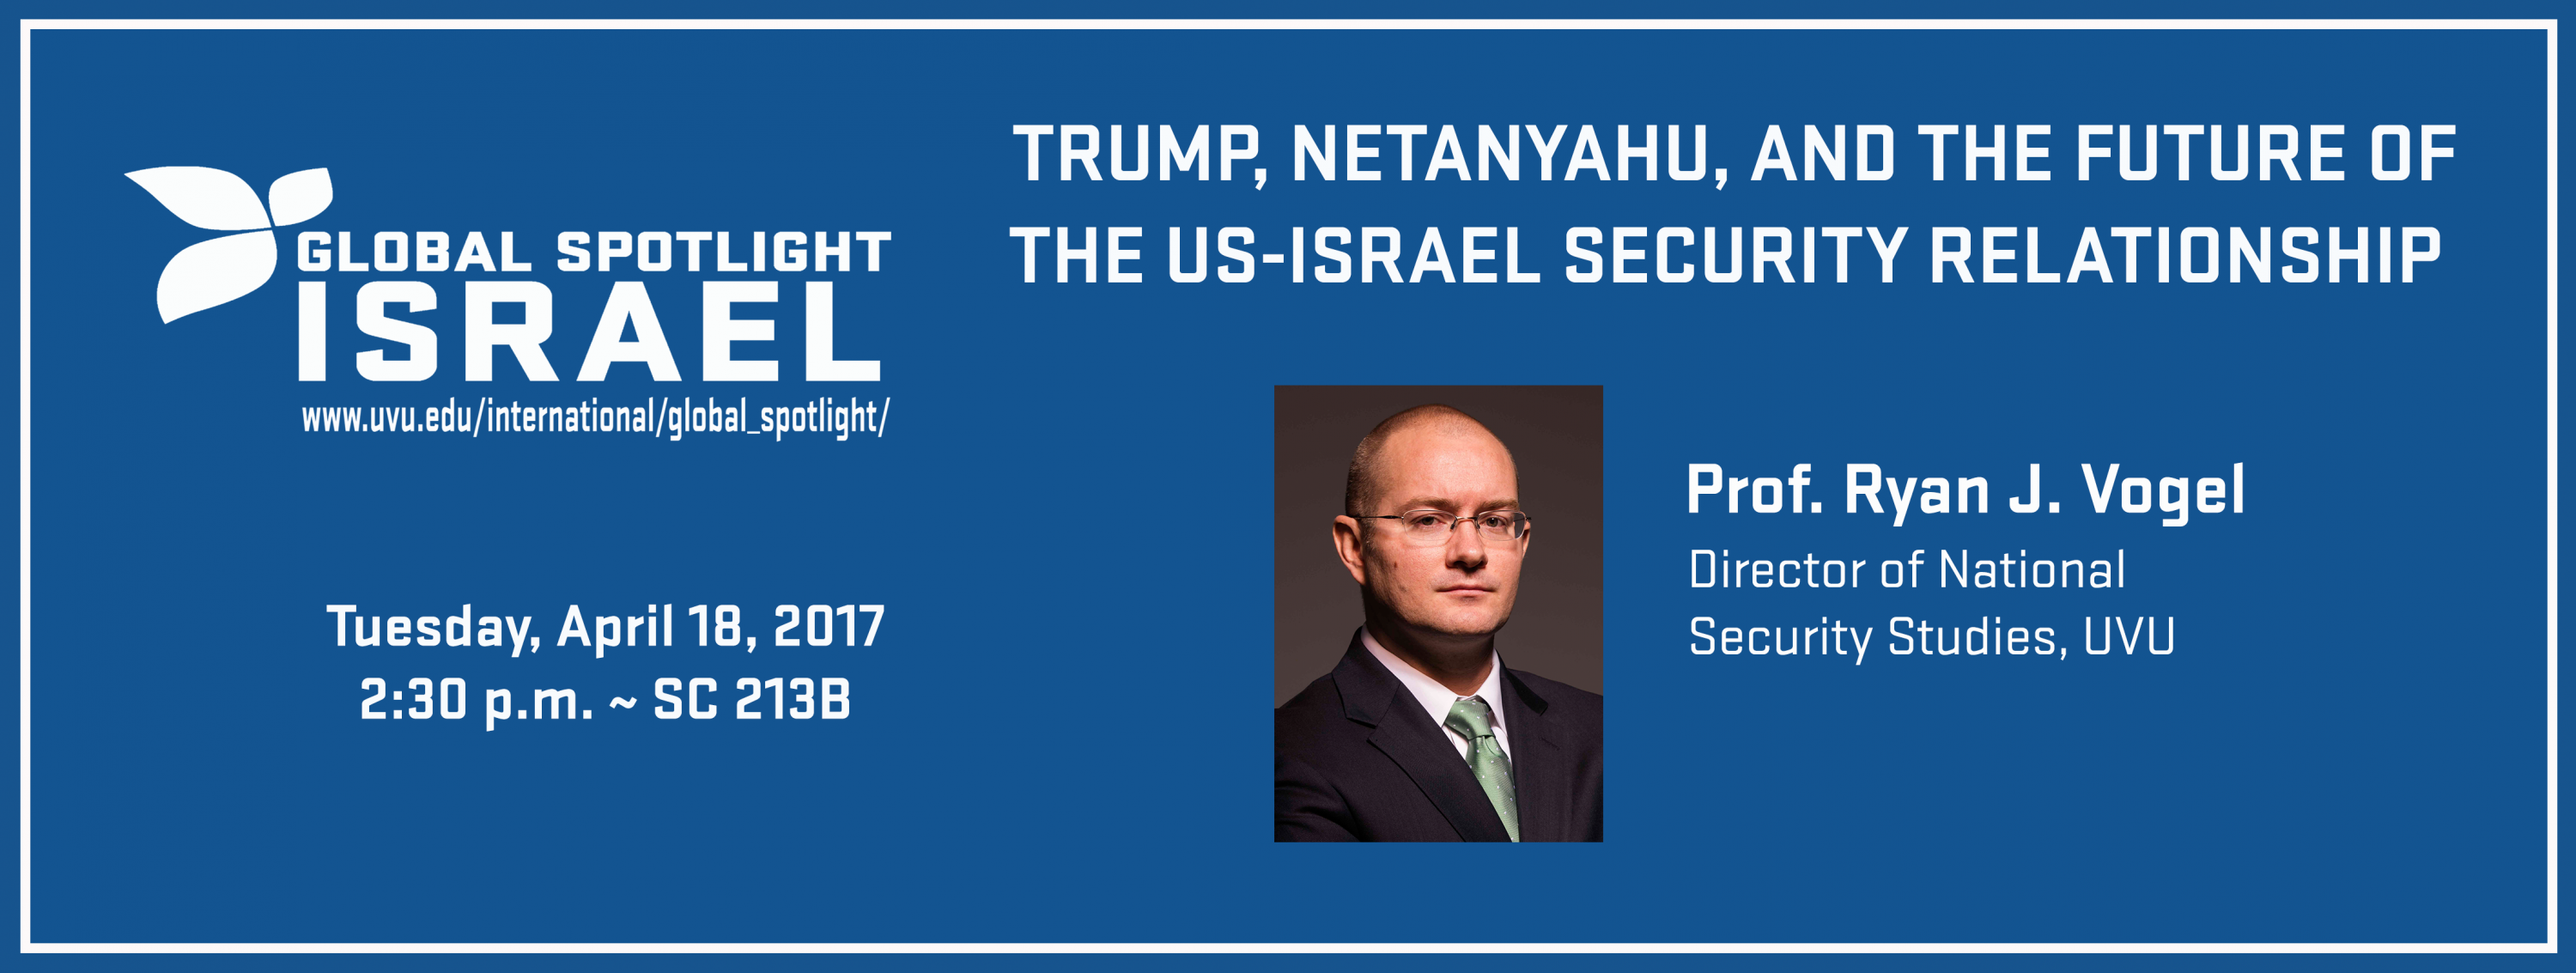 PROF. RYAN J. VOGEL: TRUMP, NETANYAHU, AND THE FUTURE OF THE US-ISRAEL SECURITY RELATIONSHIP